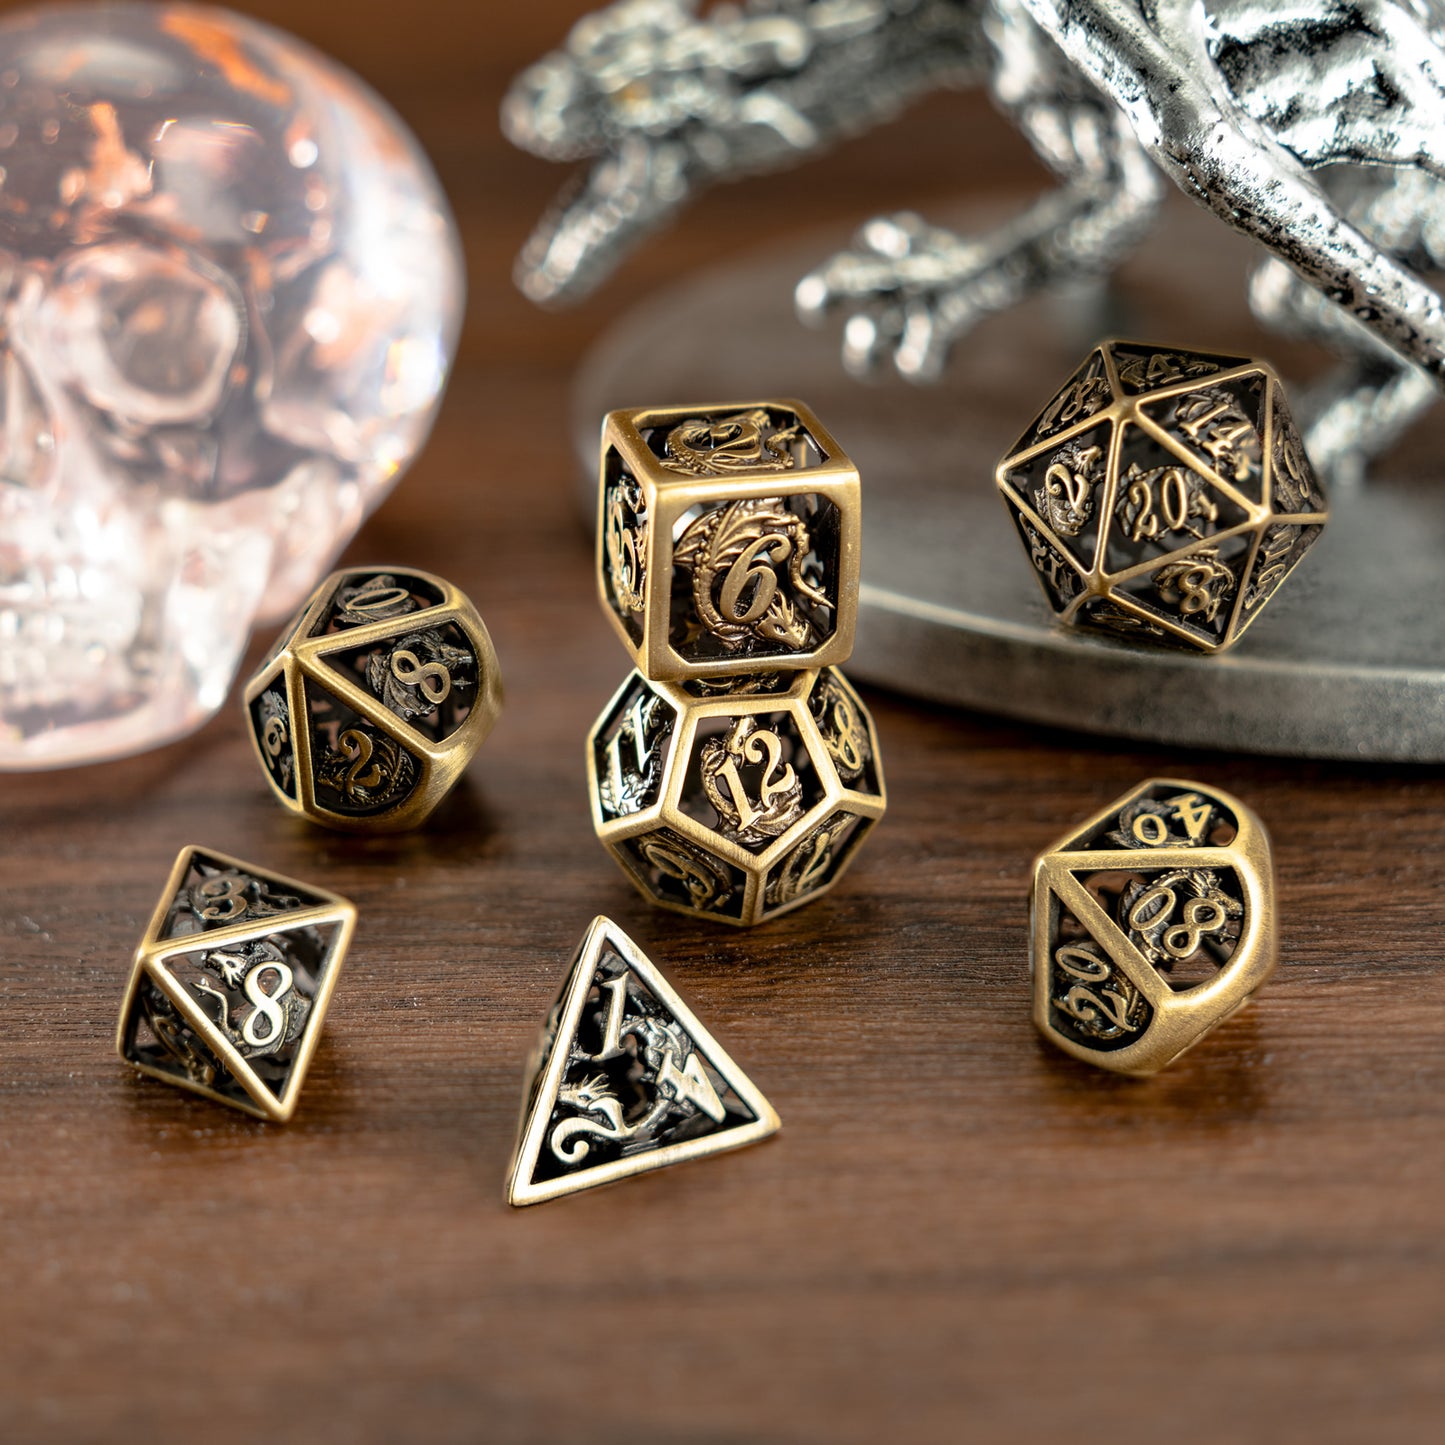 Handmade ancient old hollow dragon cage dice set for RPG games - HYMGHO Dice 